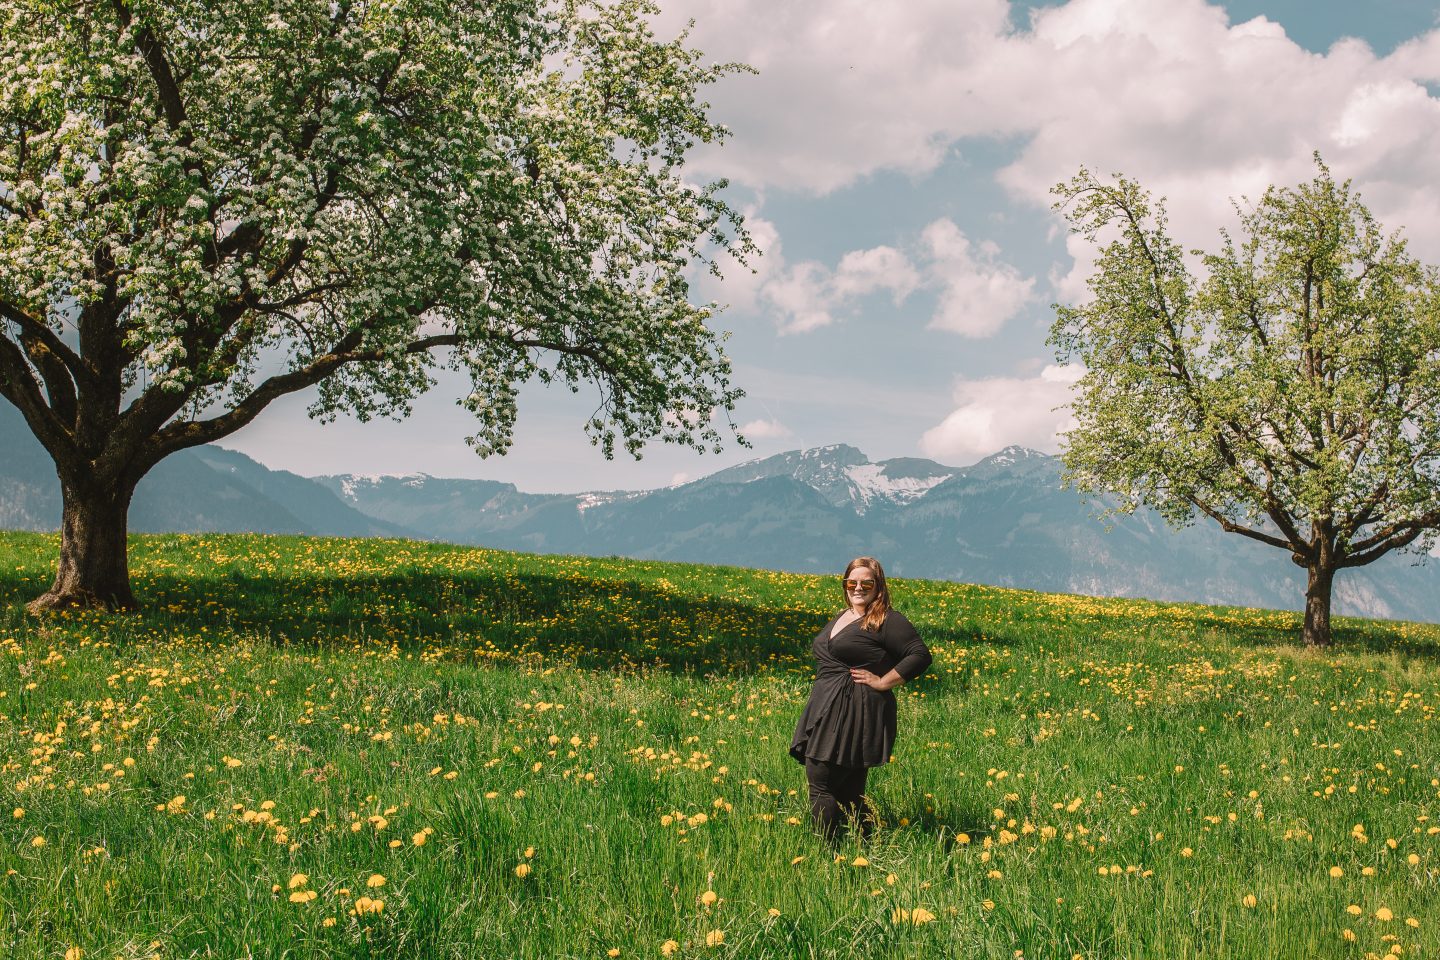 Standing in a field of wildflowers in the Swiss Alps.